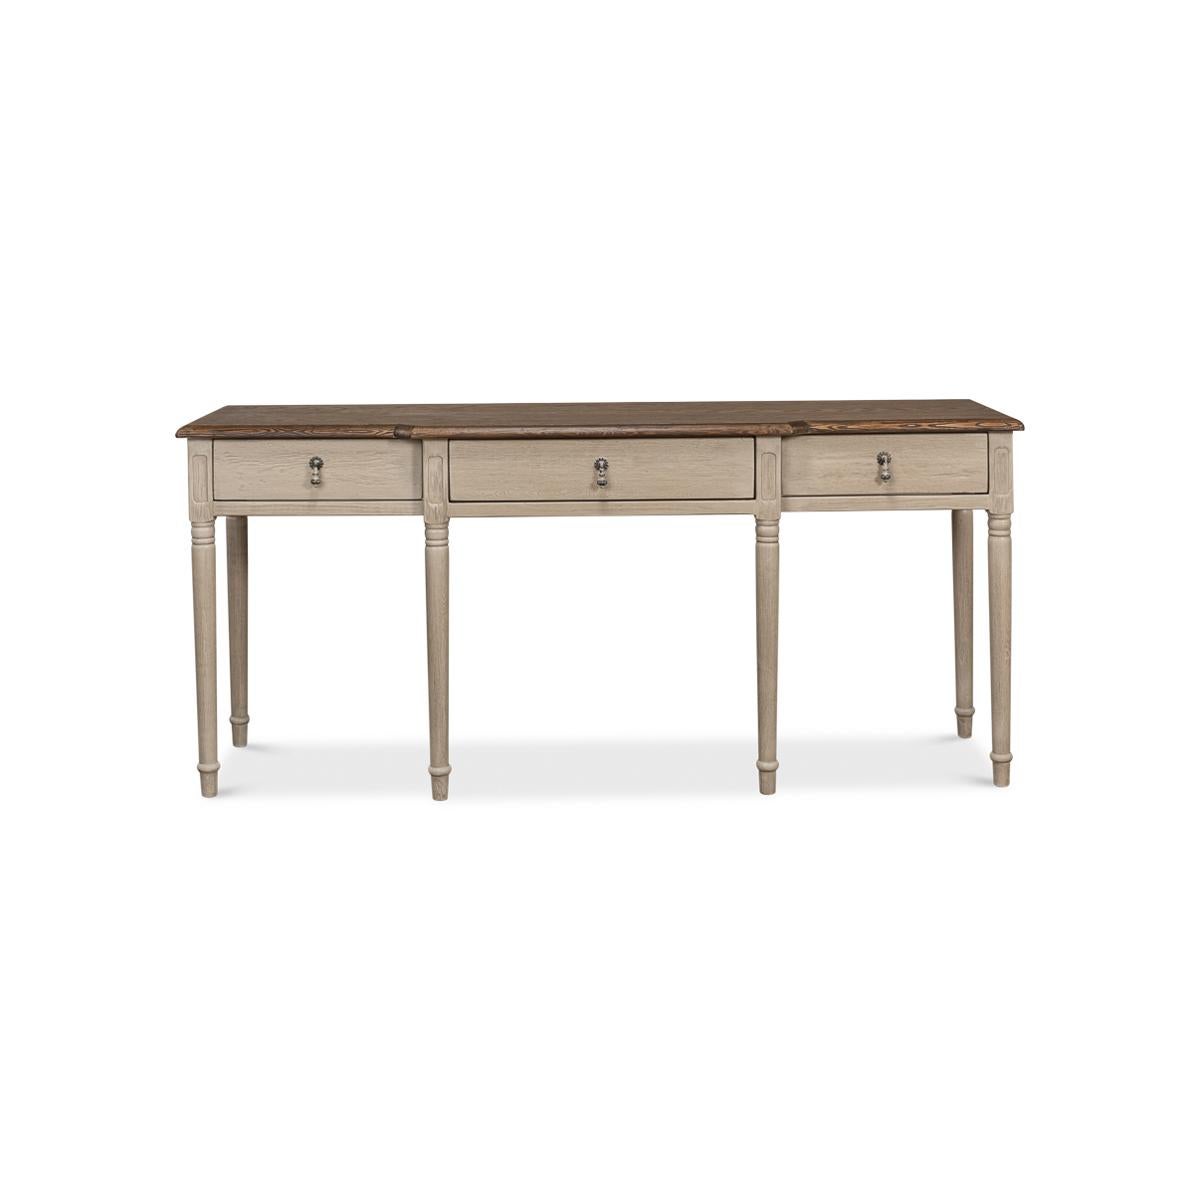 French Provincial Breakfront Console Table, the perfect addition to any elegant and sophisticated living space. This beautiful piece boasts a natural finish oak top with a molded edge, creating a sleek and refined look.

The top is contrasted by a